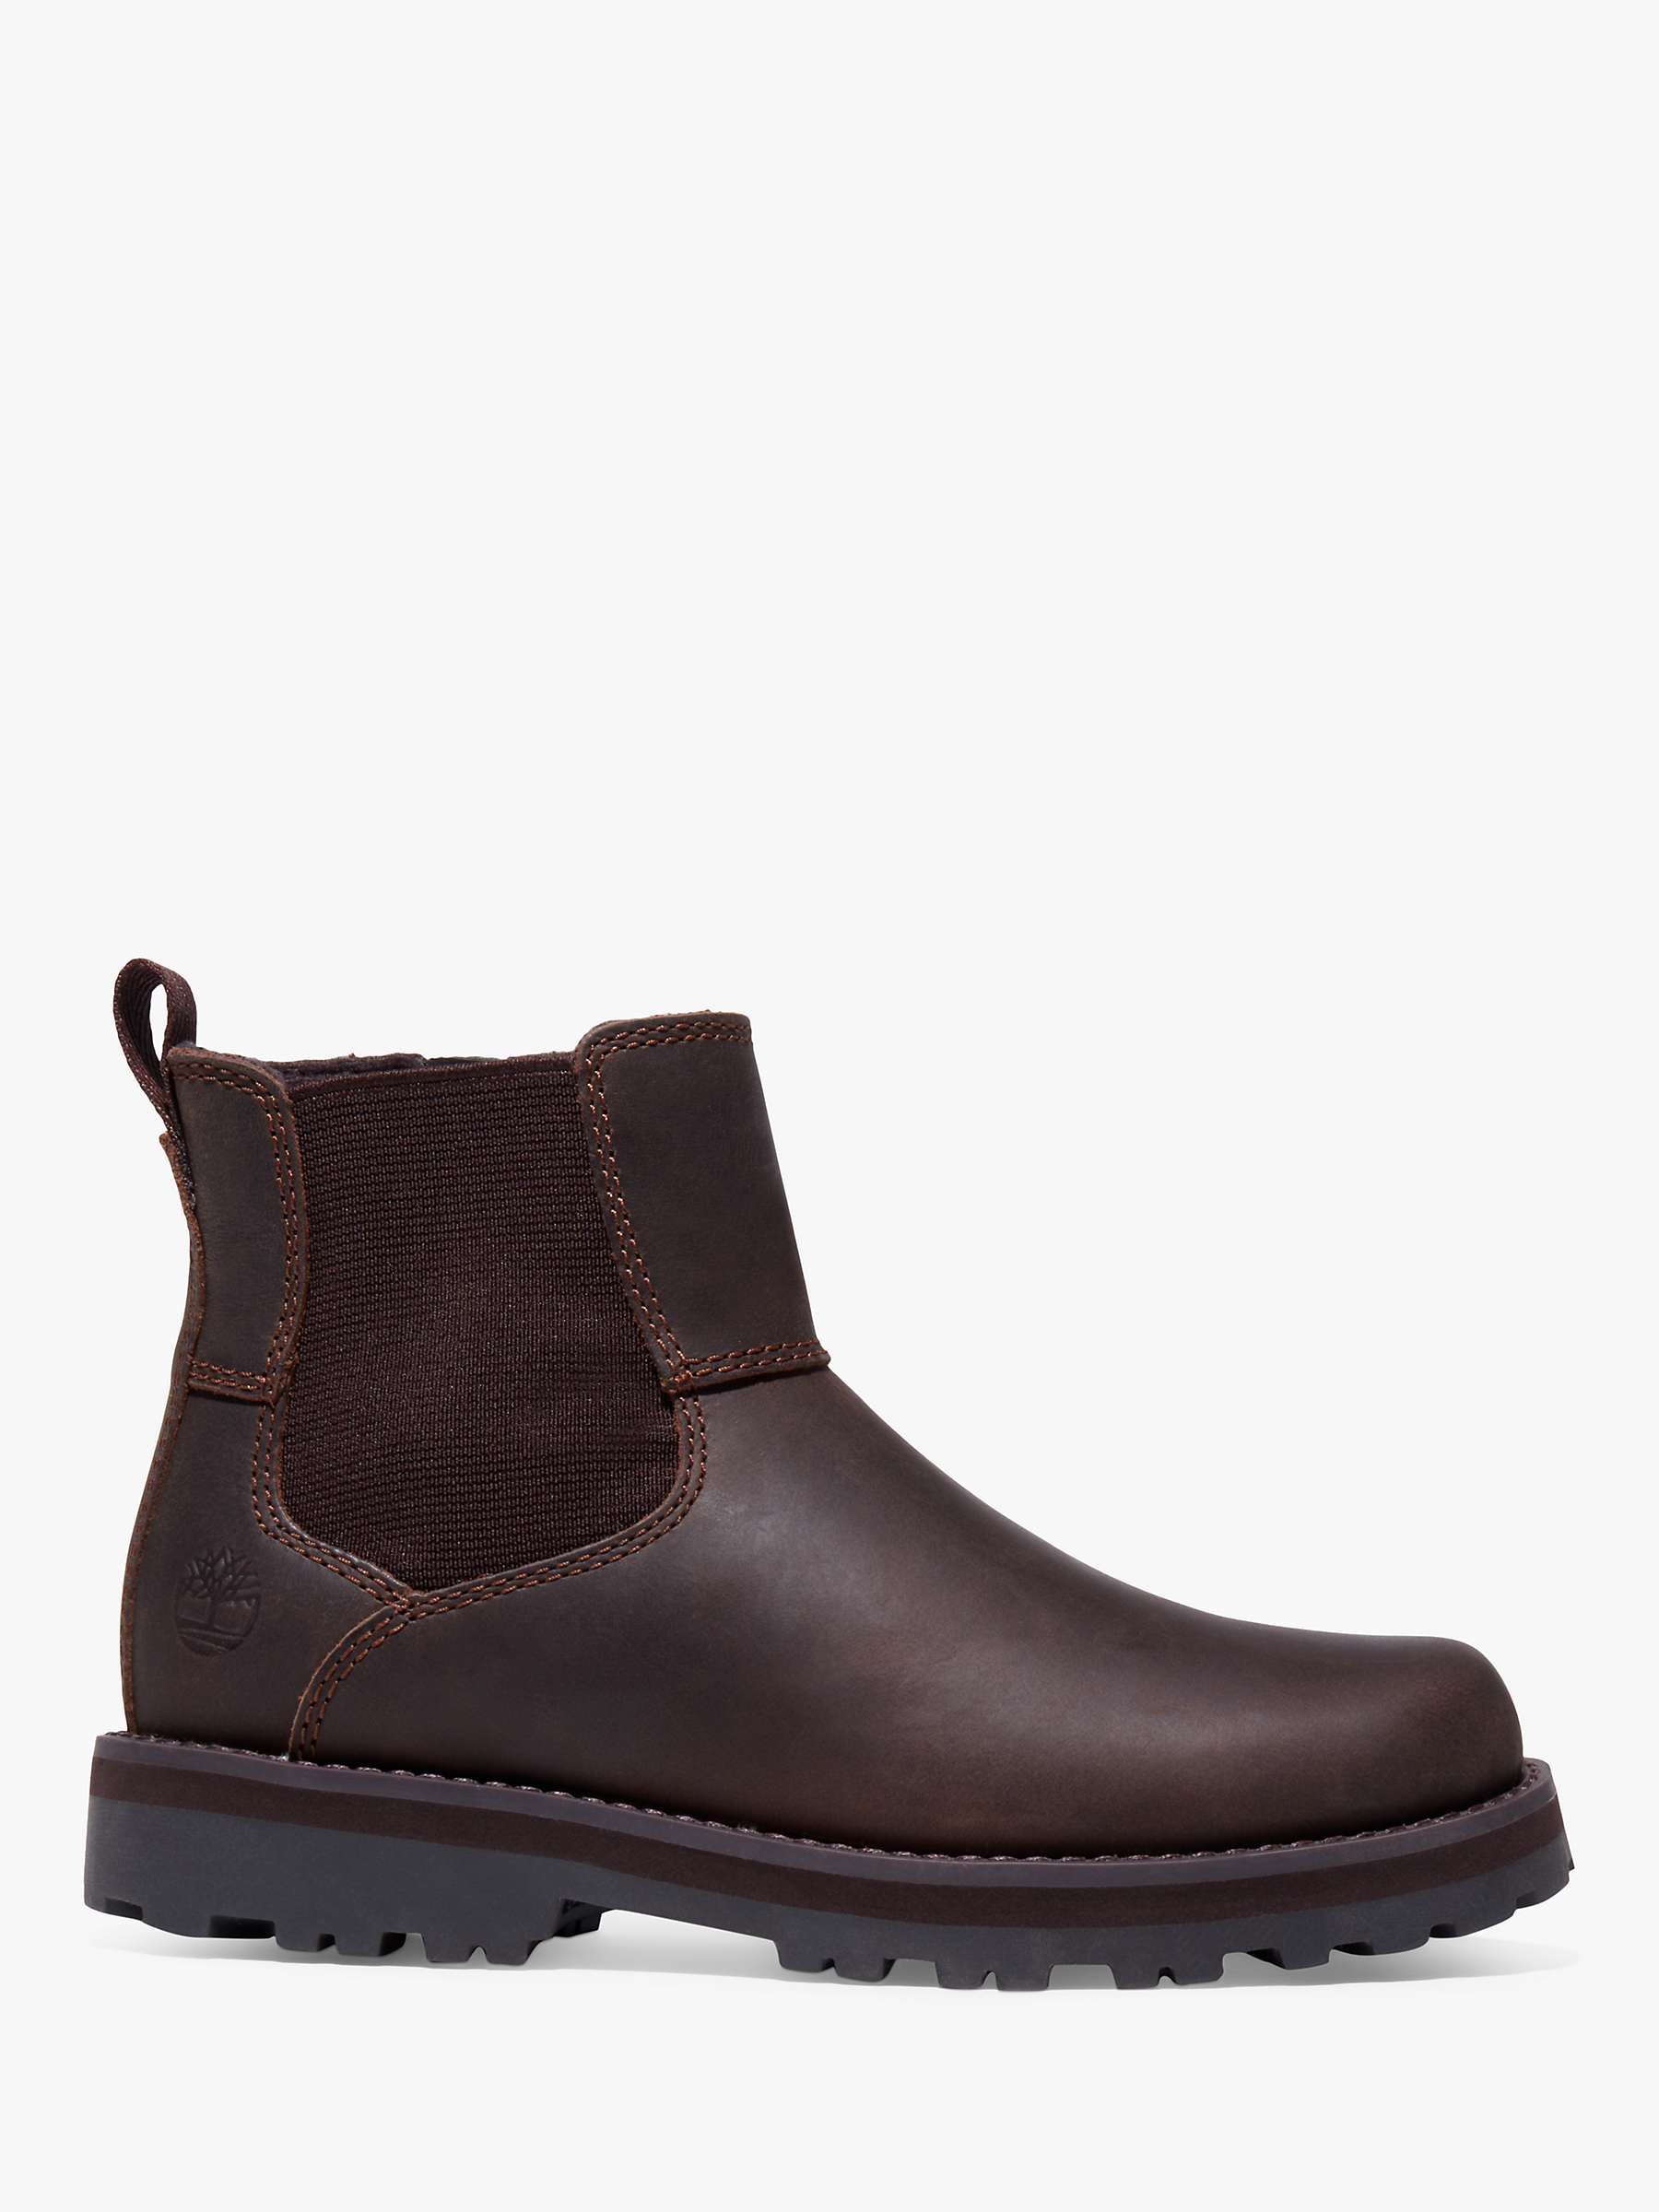 Buy Timberland Kids' Courma Kid Chelsea Boots Online at johnlewis.com